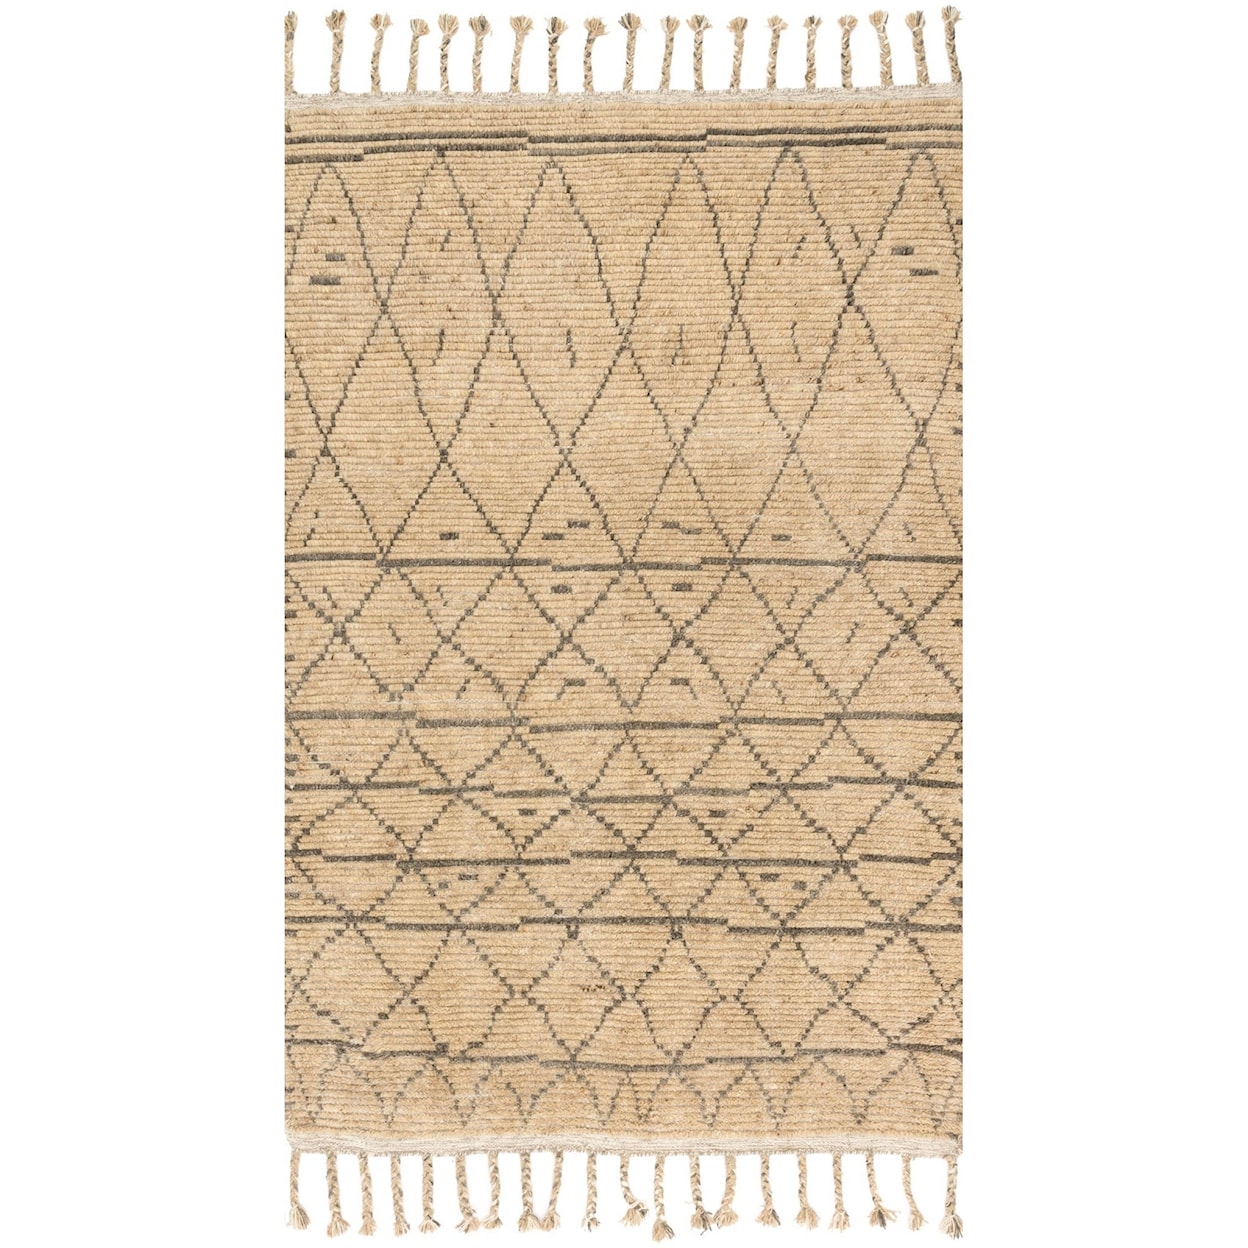 Magnolia Home by Joanna Gaines for Loloi Tulum 4' 0" x 6' 0" Rectangle Rug